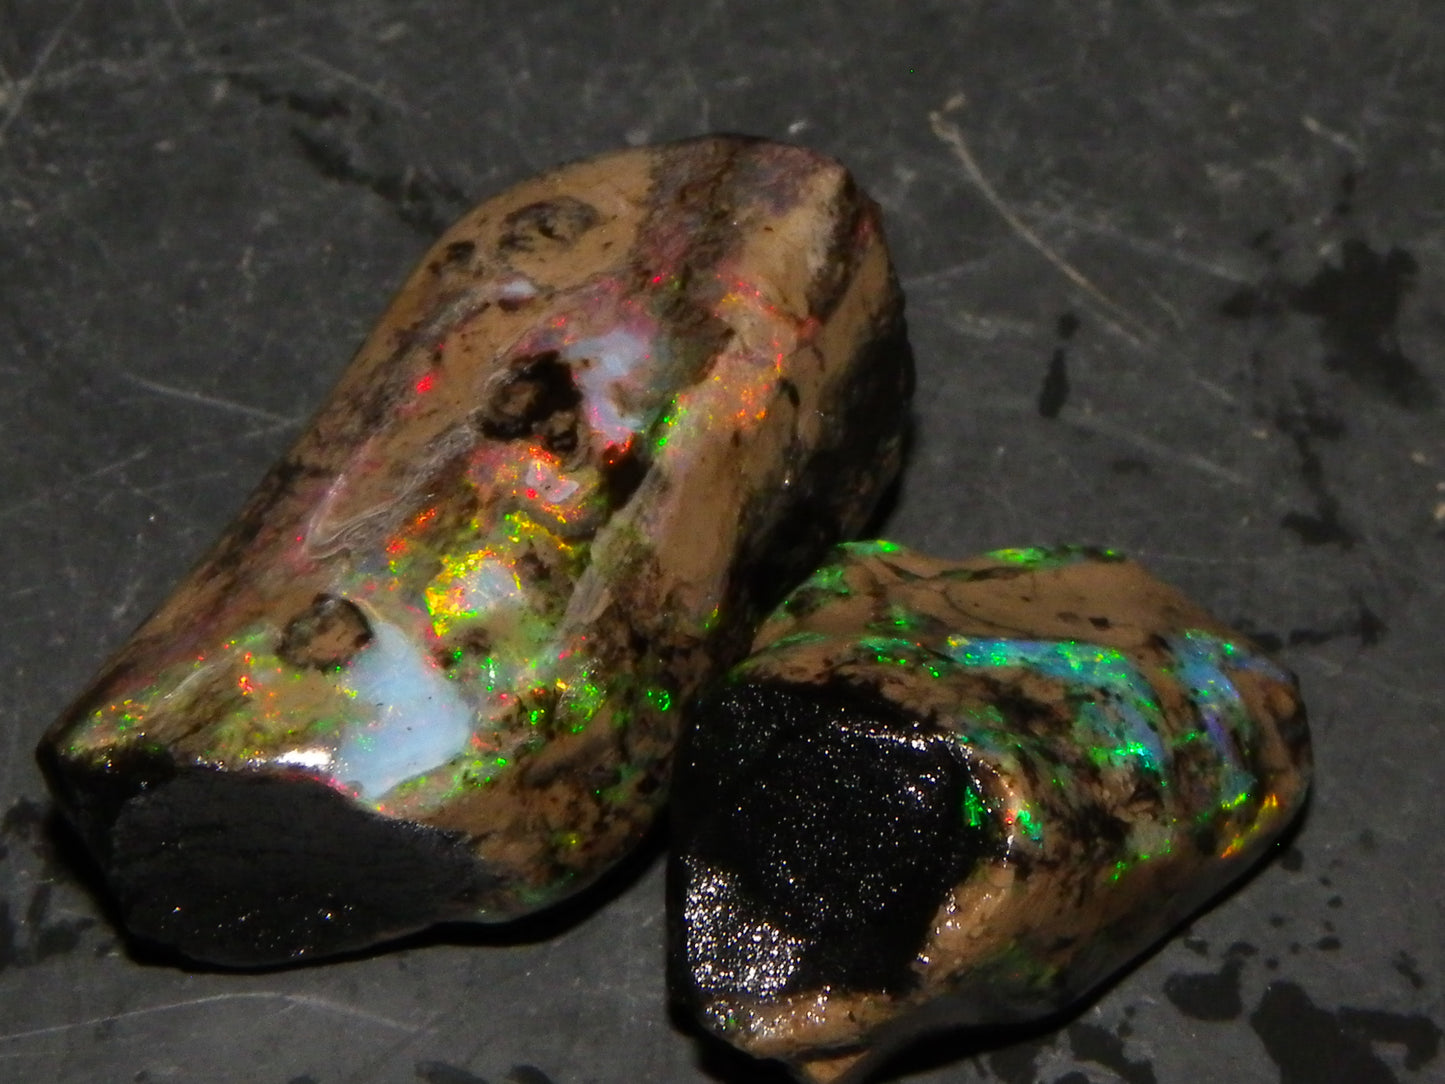 2 Nice Quality Indonesian Fossil Opal Specimens 41.3cts Bright Fires Green/Reds